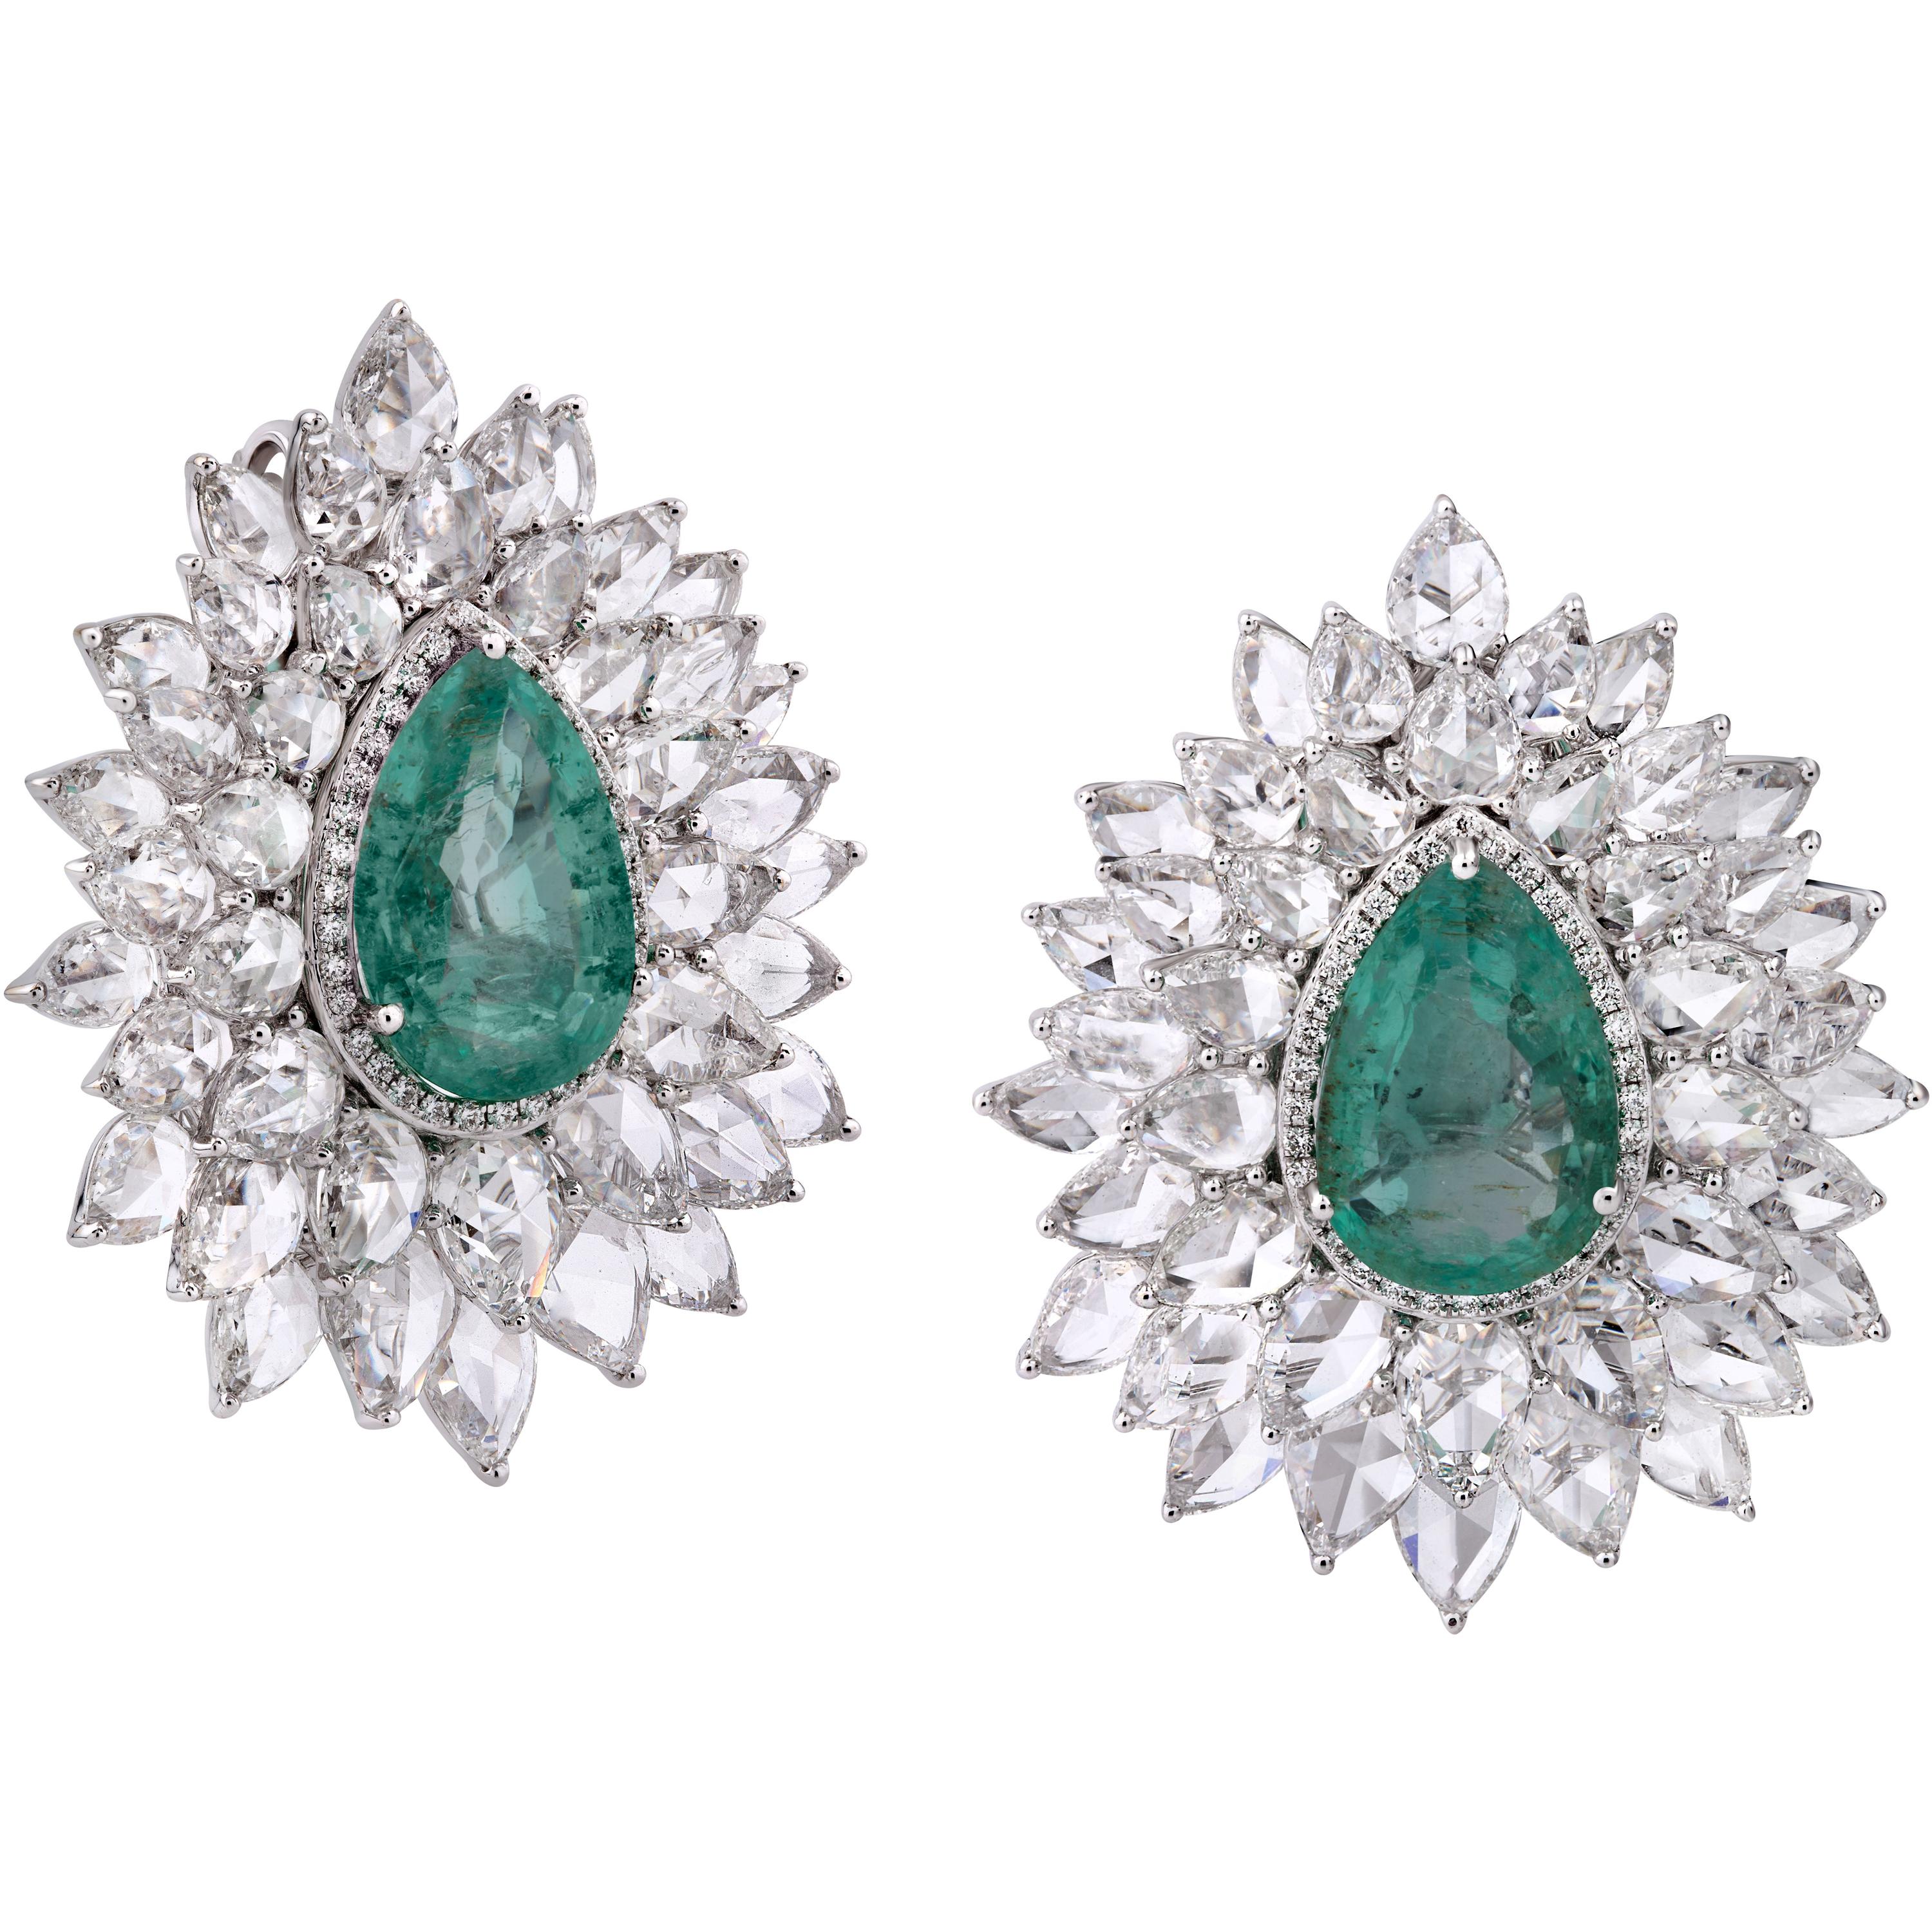 18k White Gold 8.88ct Old Mine Emerald and Rose Cut Diamond Studs Earrings